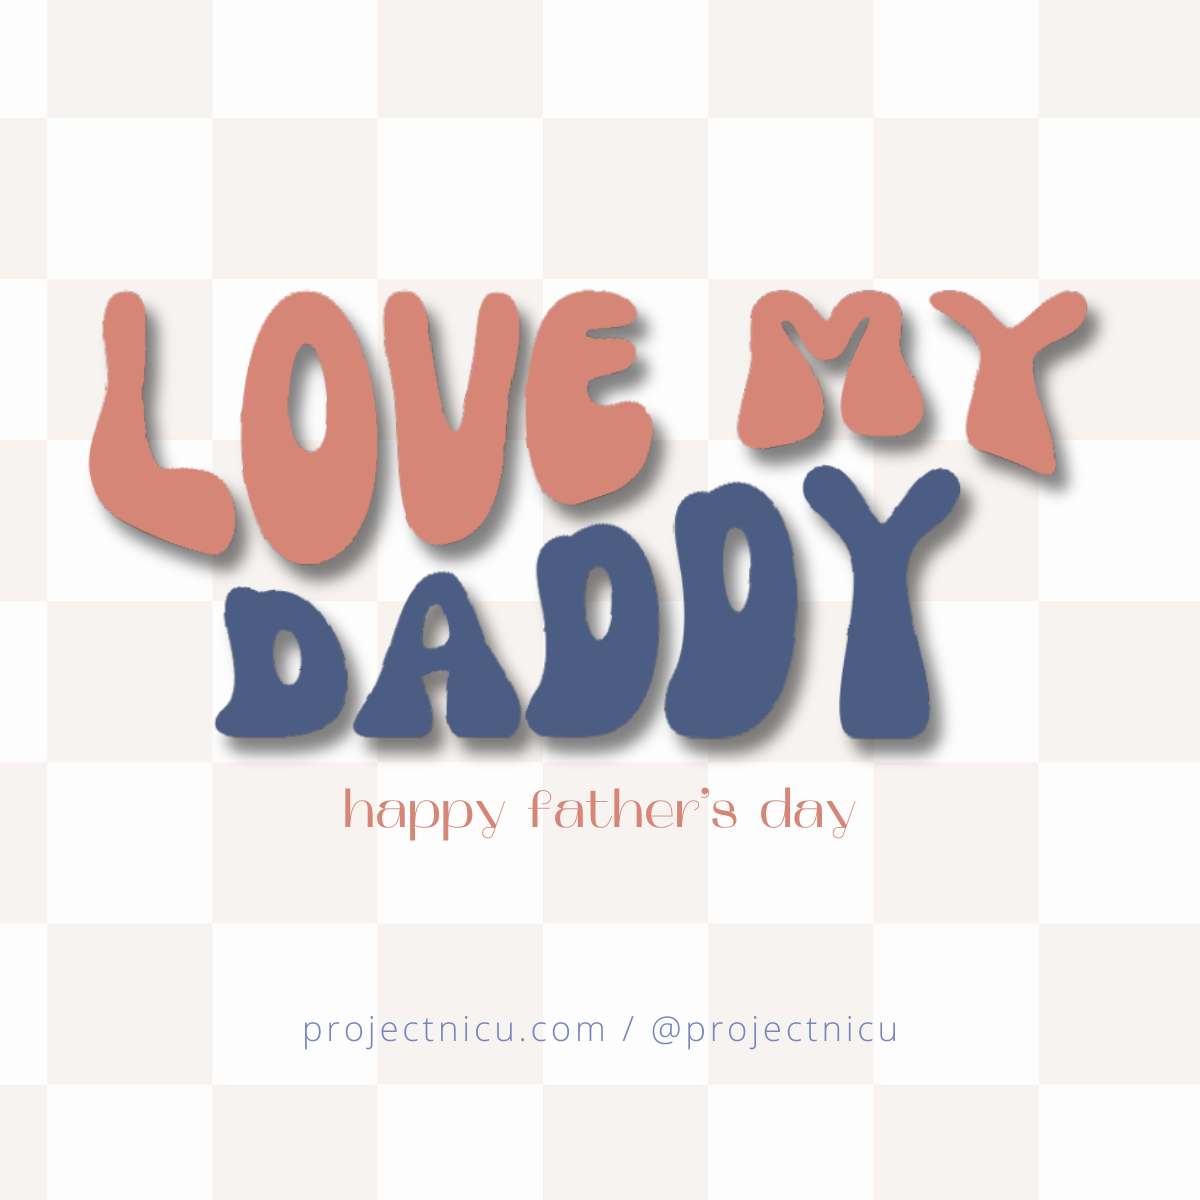 Fathers Day_love my daddy.png